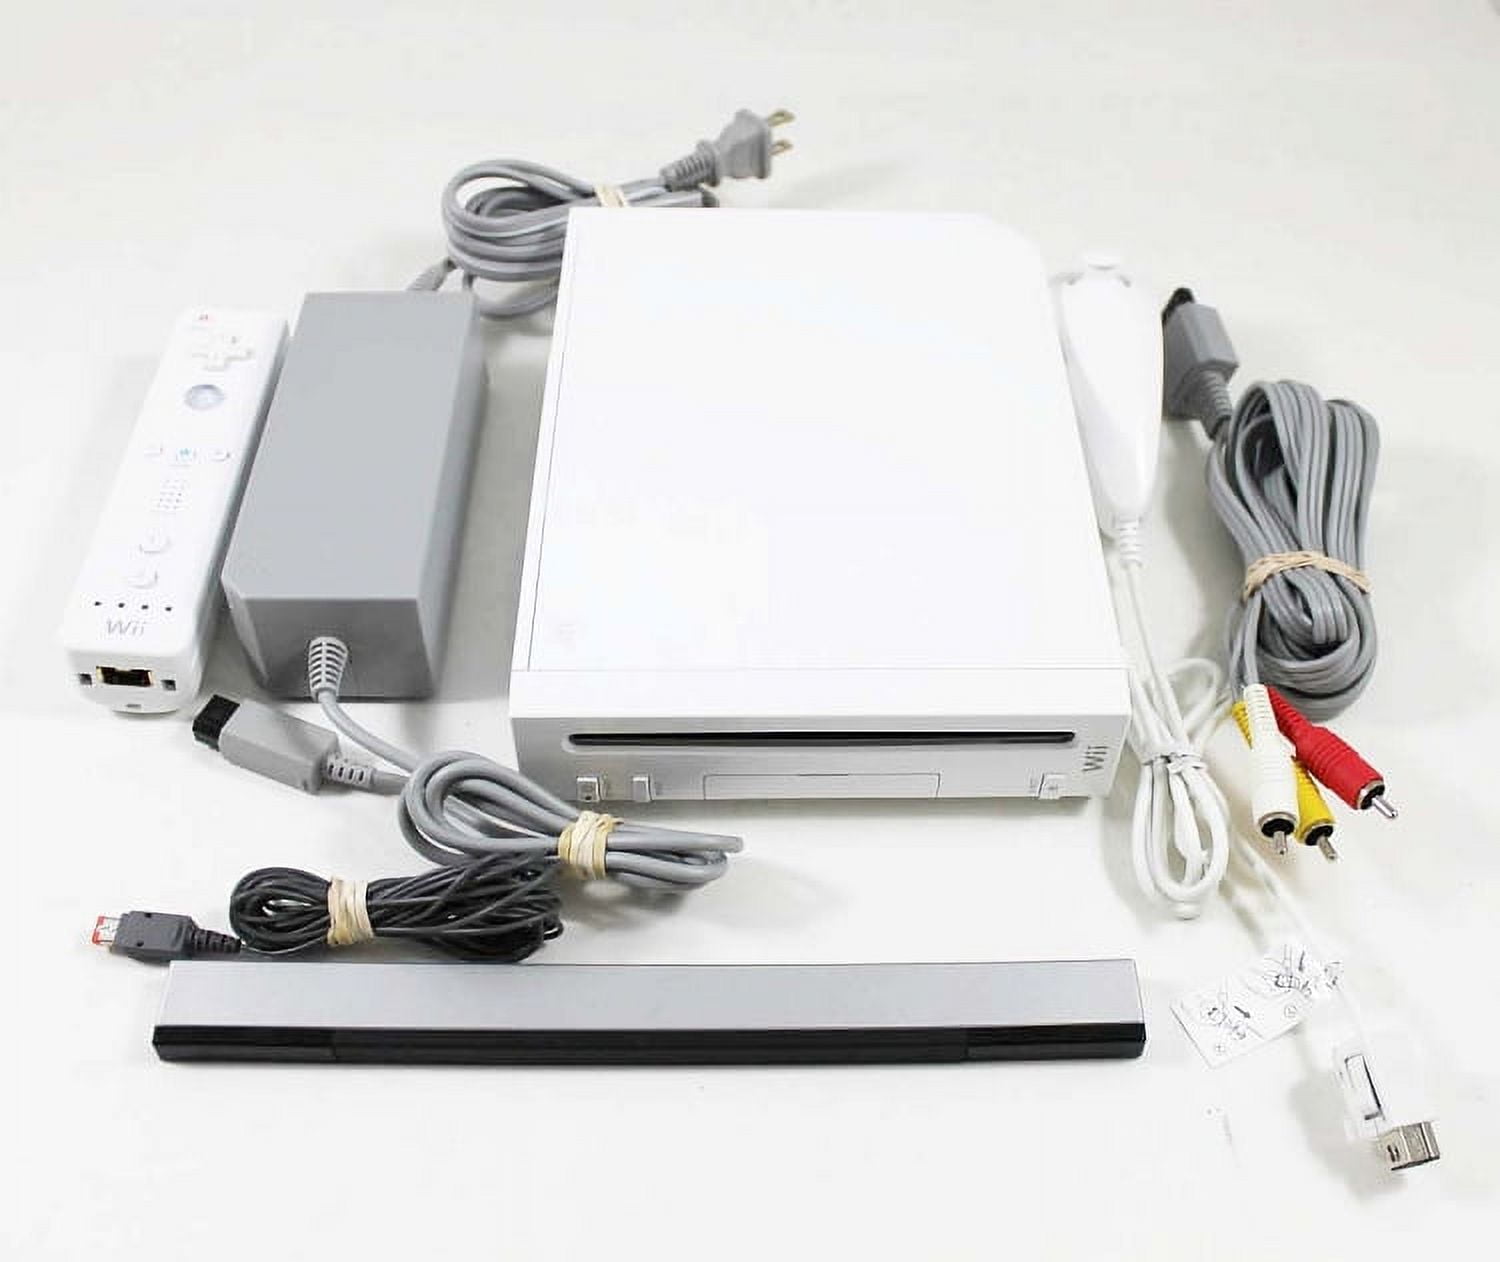 Up to 70% off Certified Refurbished Nintendo Wii Gaming Console